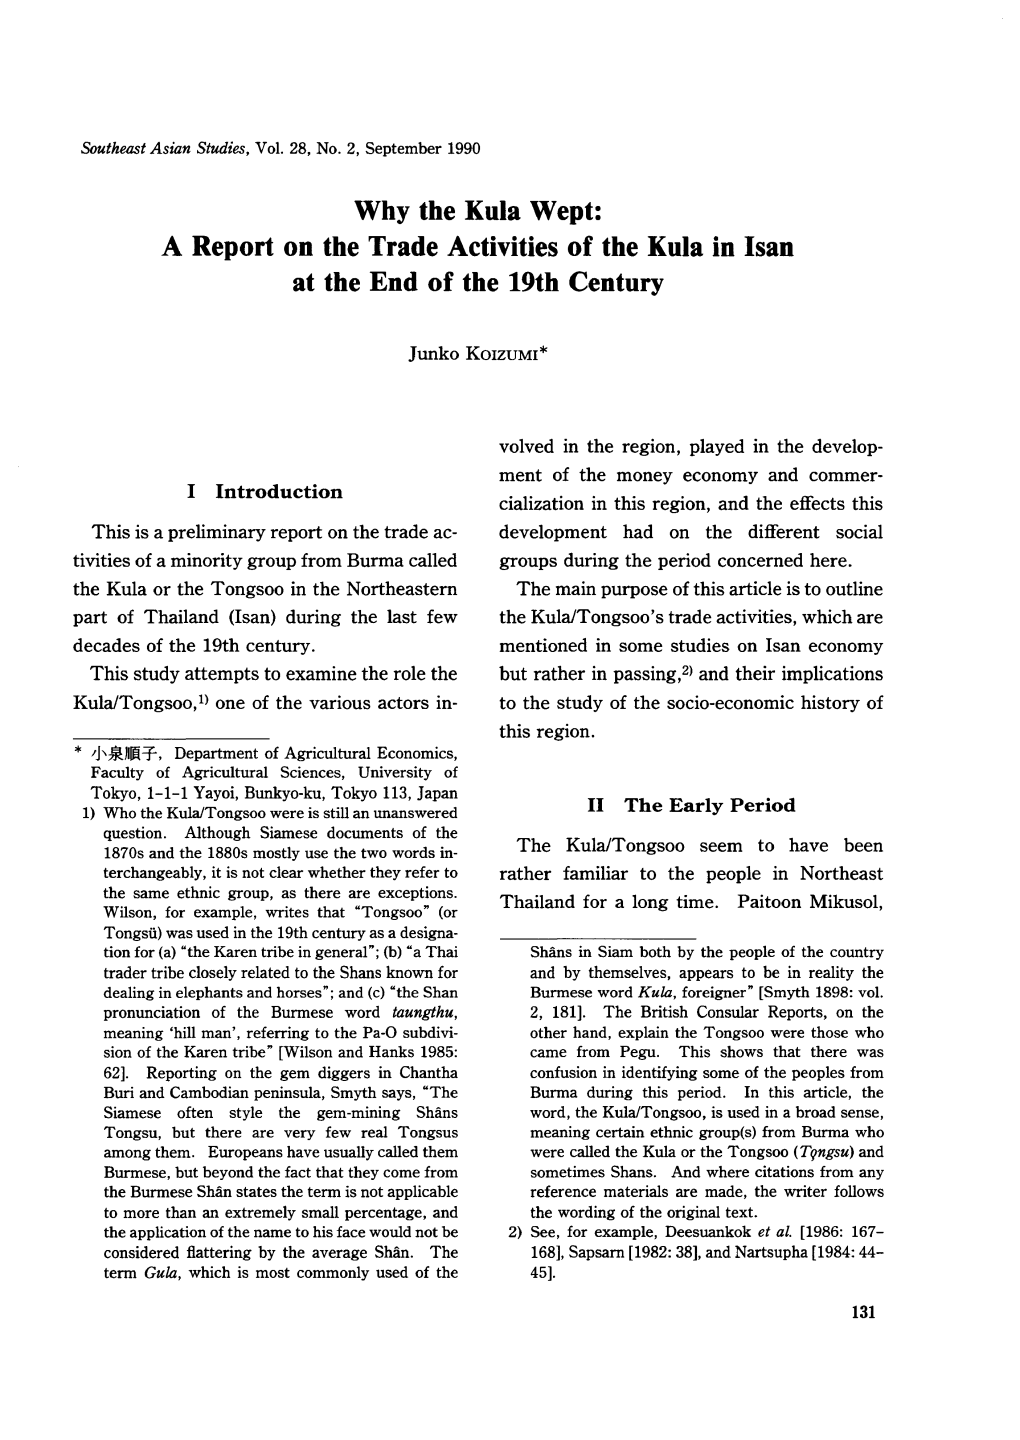 Why the Kula Wept: a Report on the Trade Activities of the Kula in Isan at the End of the 19Th Century